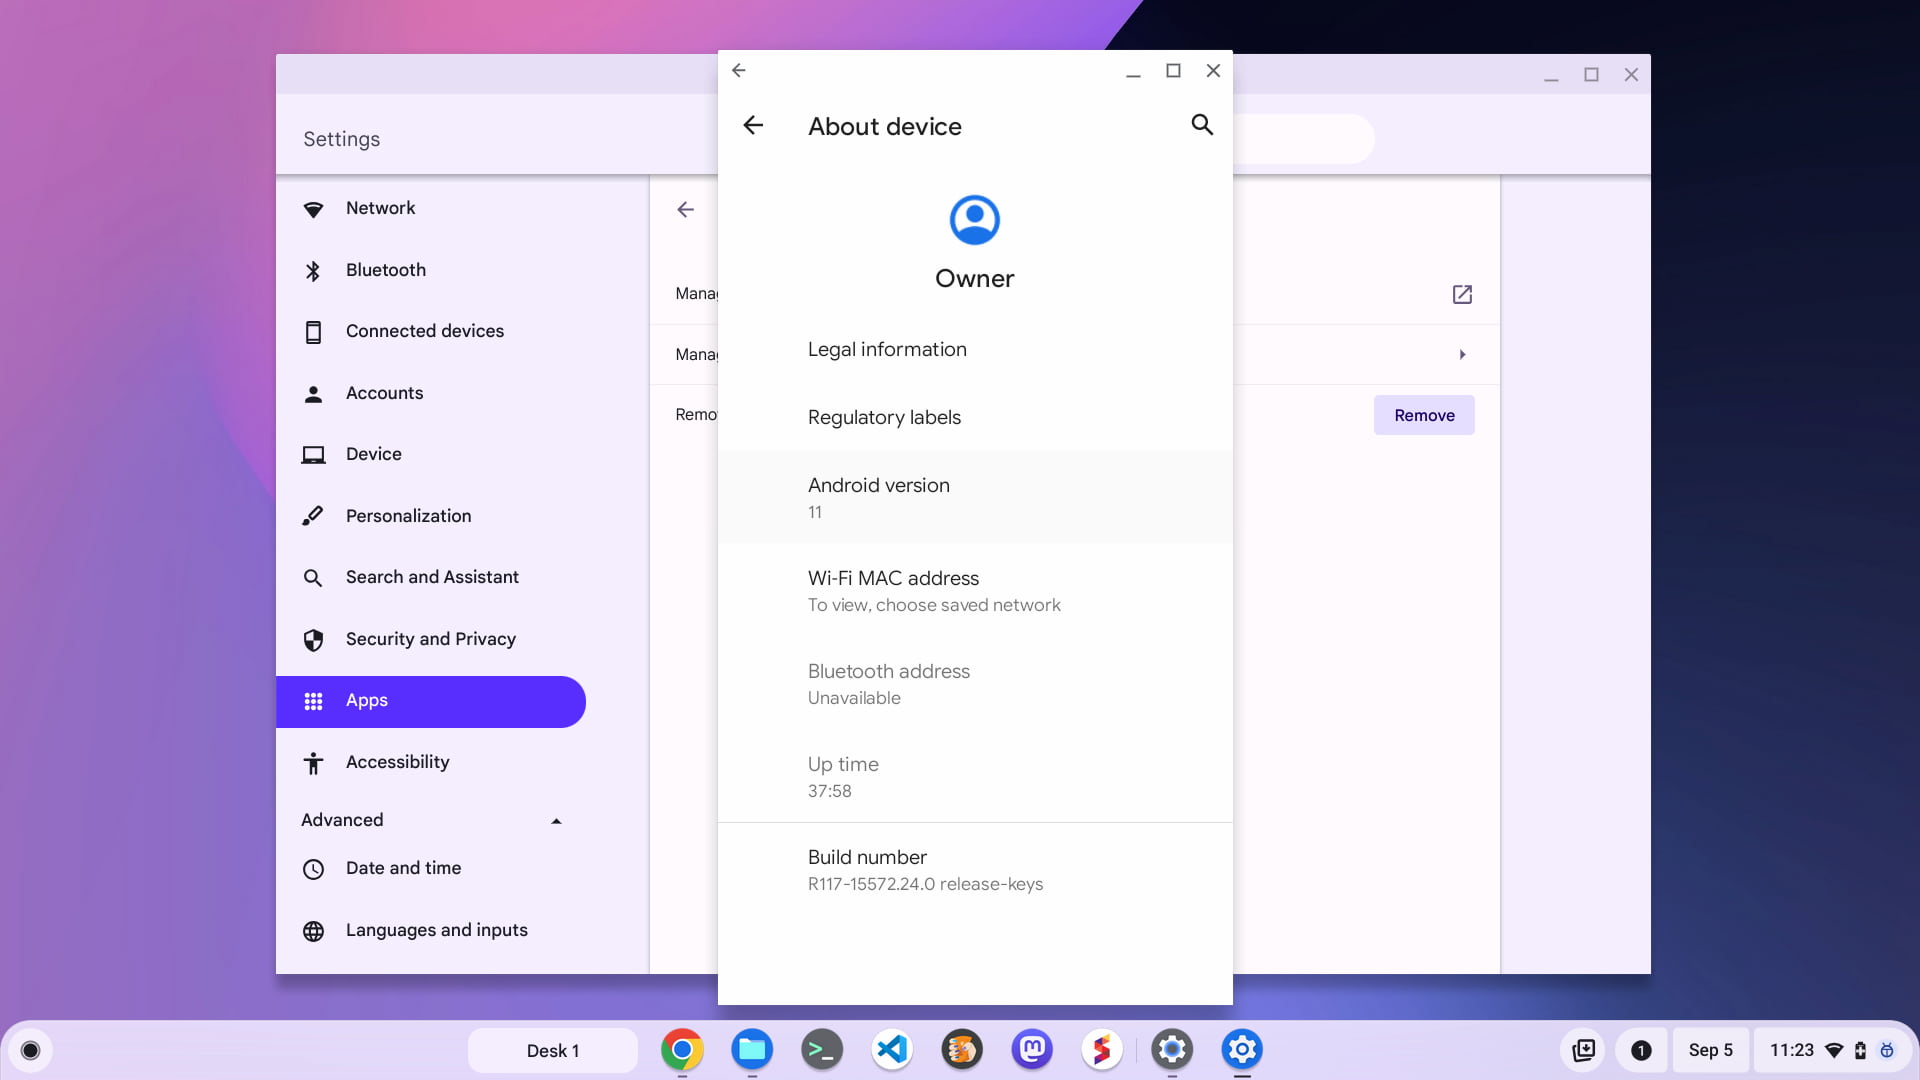 Viewing the version of Android on a Chromebook